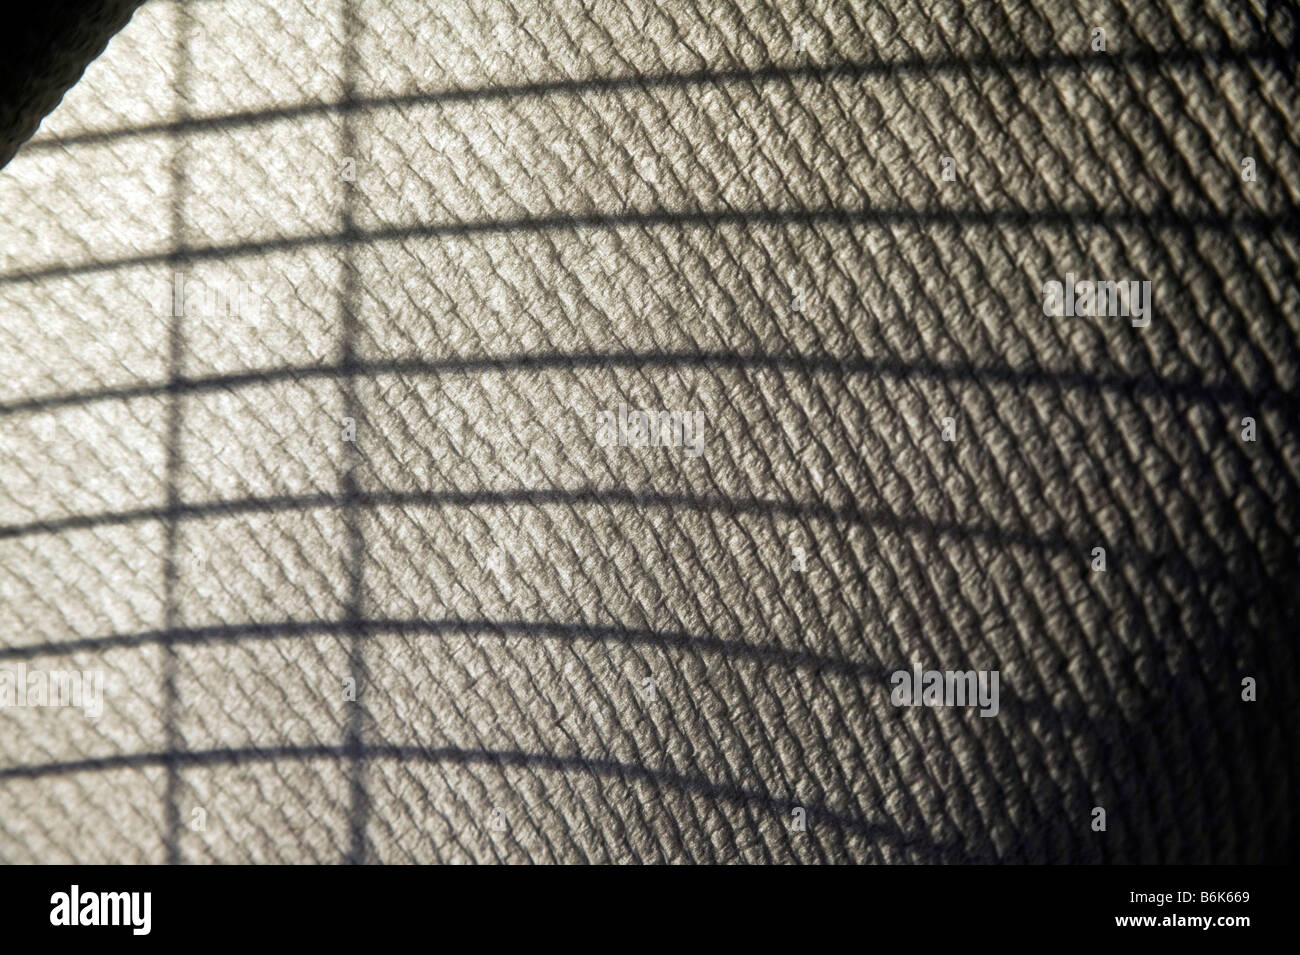 Sunlight streaming through venetian blinds create a striped pattern of shadows on a roll of paper towels. Stock Photo